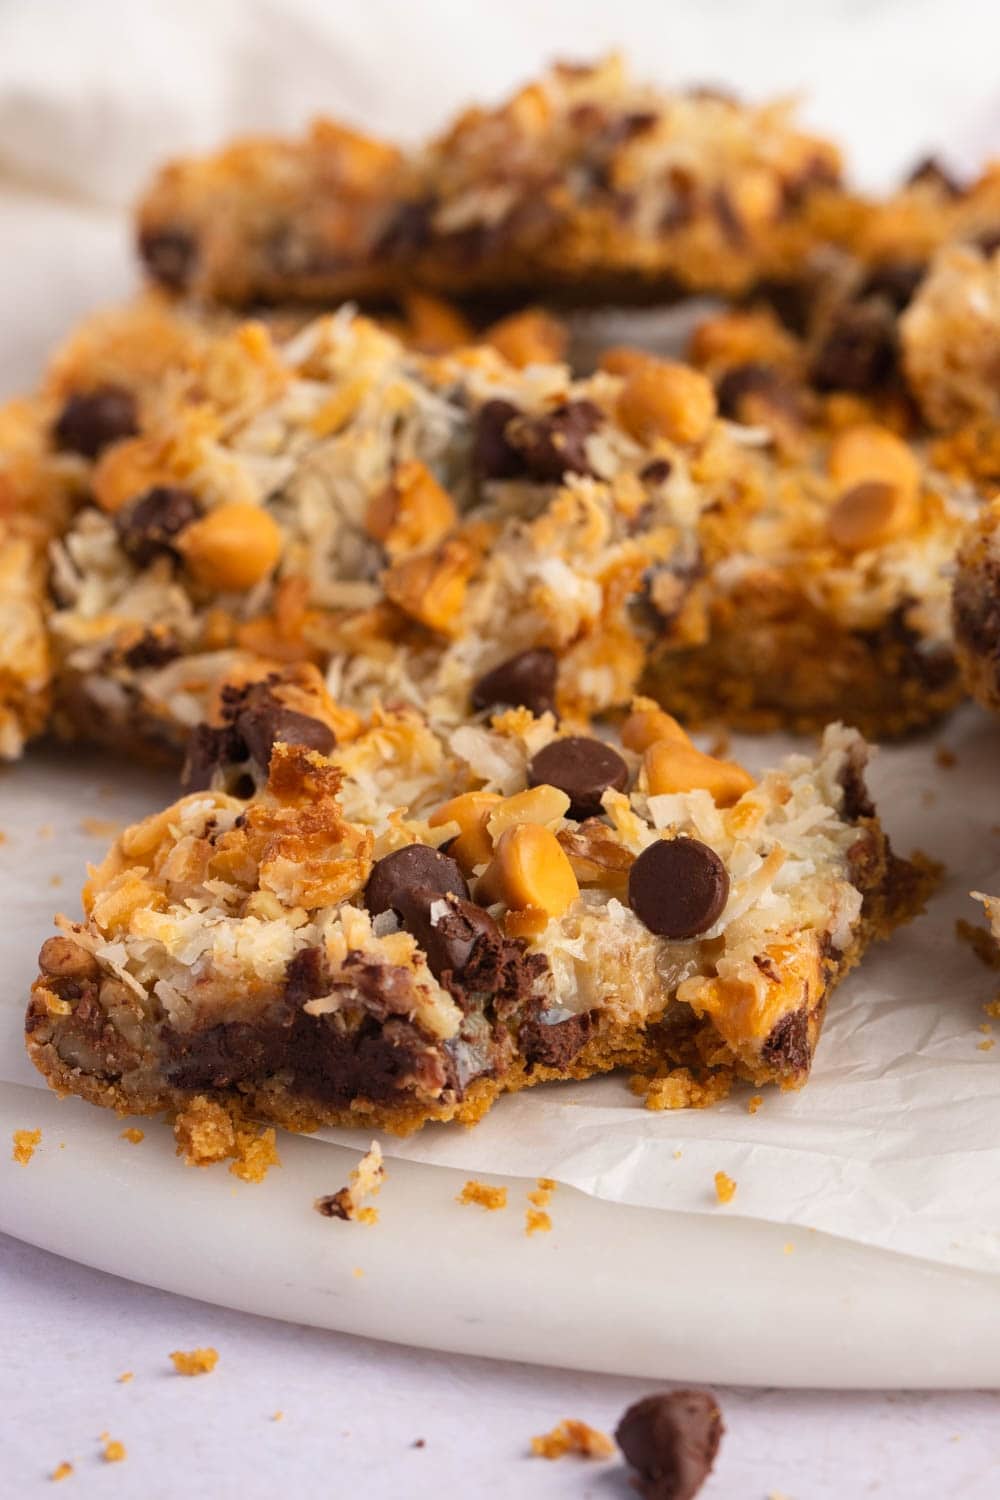 Sweet and Crumbly Seven Layer Bars with Chocolate Chips on a Parchment Paper